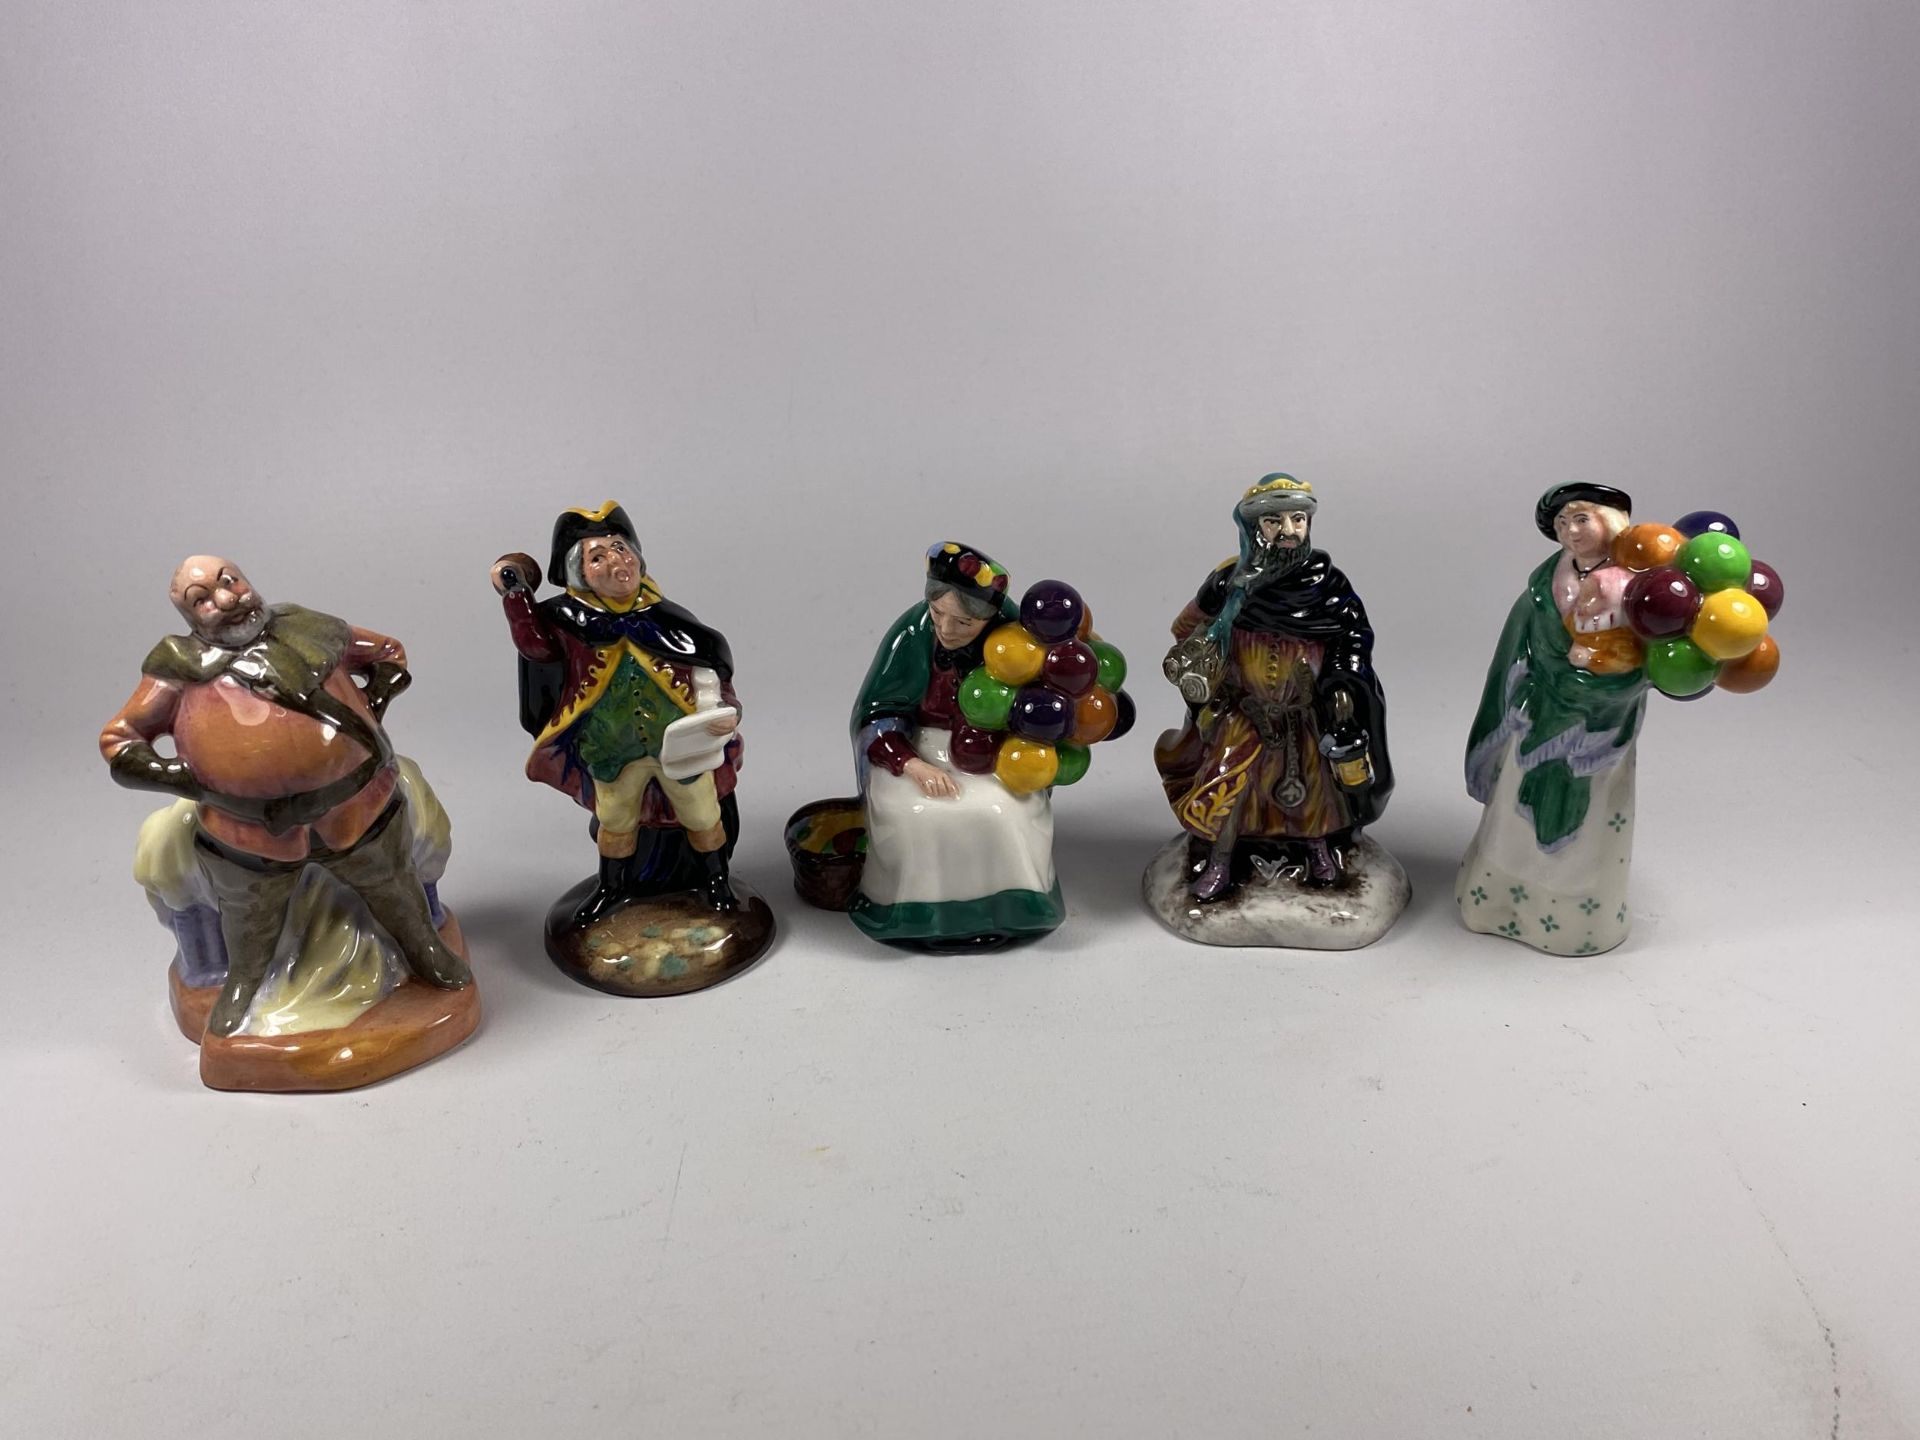 A GROUP OF FIVE SMALL ROYAL DOULTON CHARACTER FIGURES - FALSTAFF, TOWN CRIER, THE OLD BALLOON